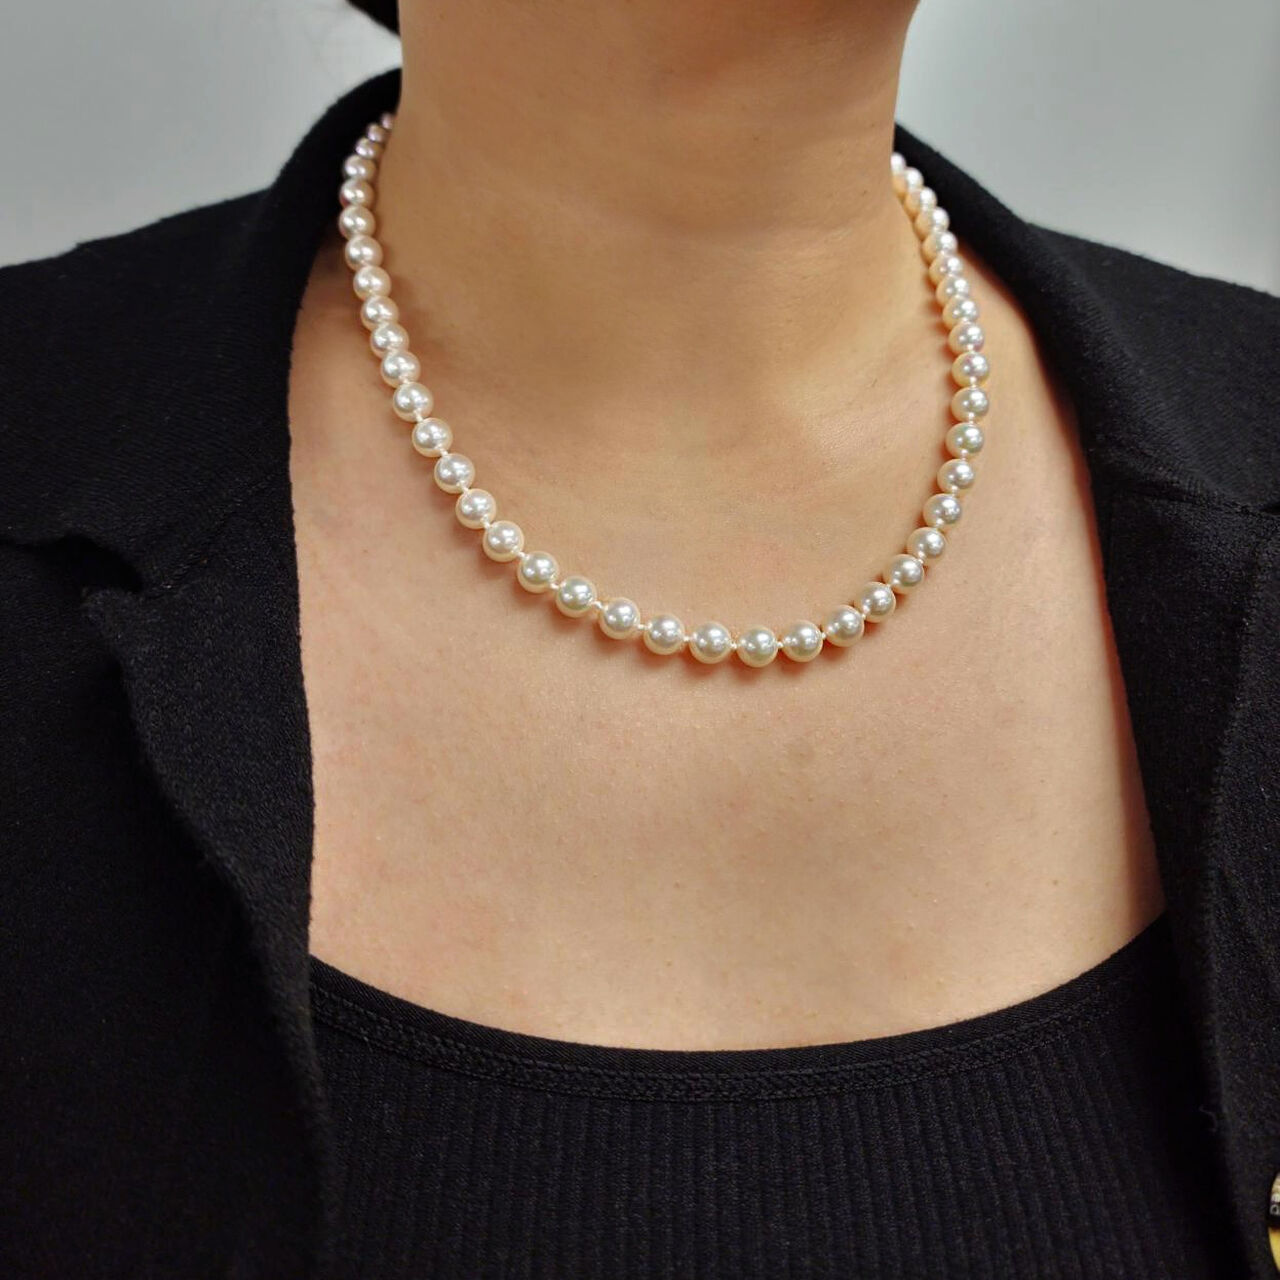 Freshwater Pearl Necklace - 6.5-7mm